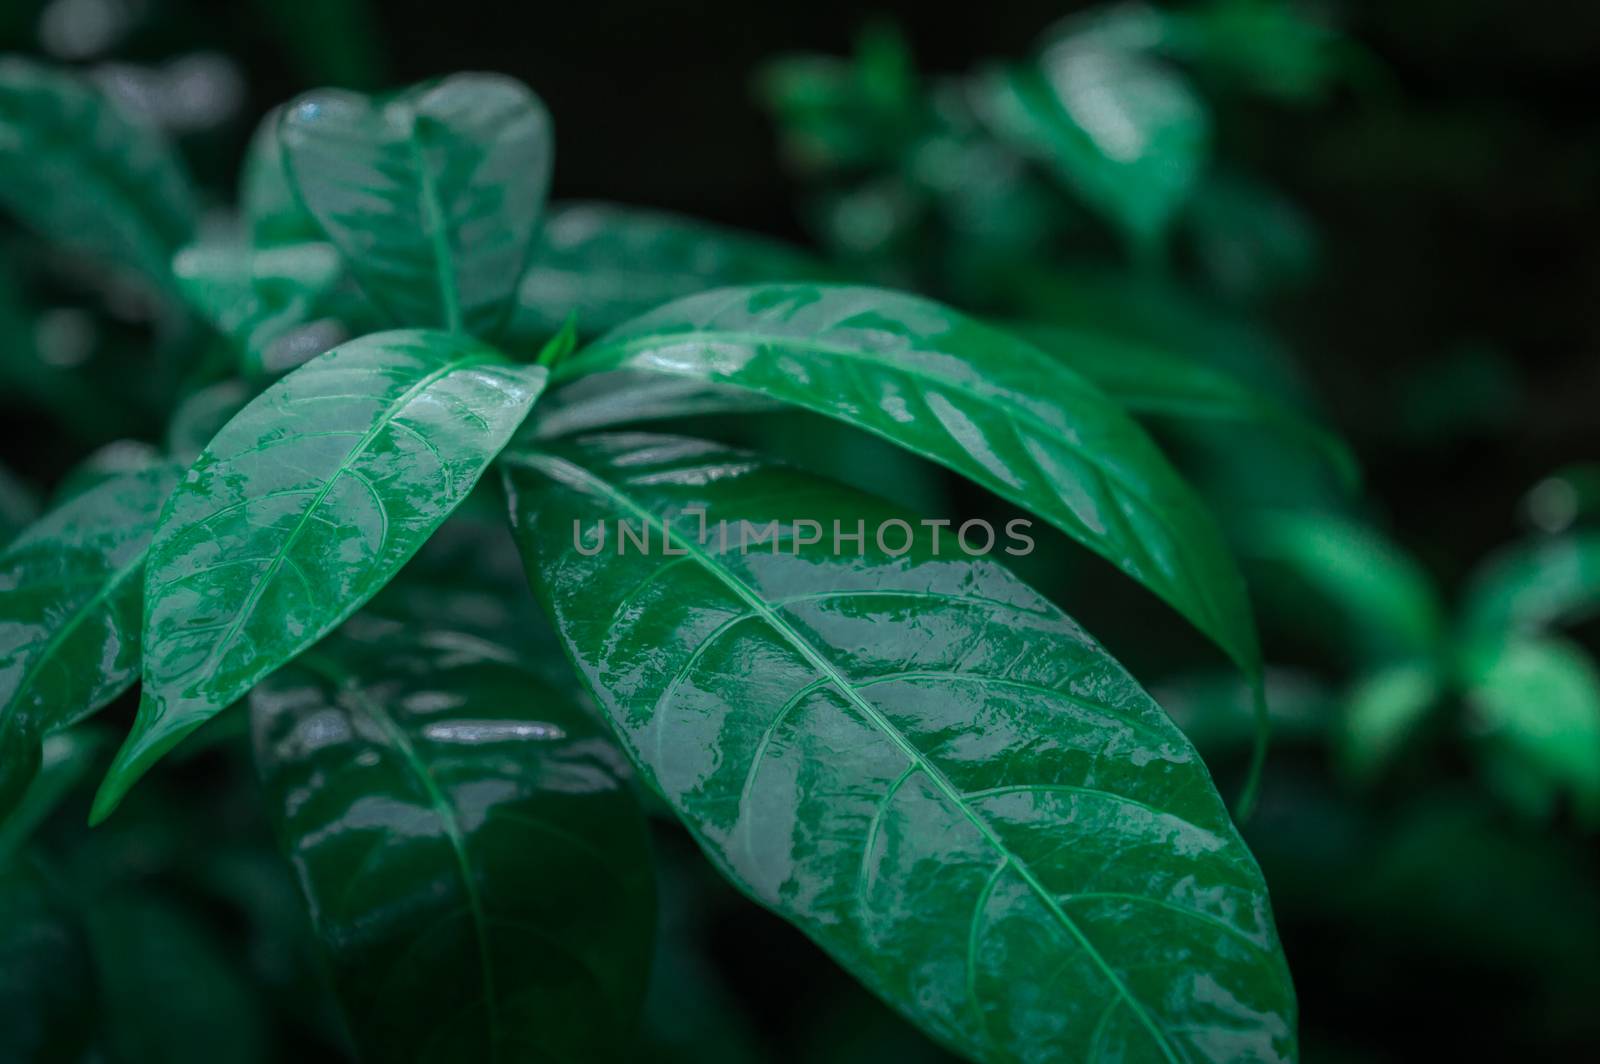 Leaves in rain. Wet in water. Beautiful Home Decor Plant drenched in rain. Green leaves background design images. Pictures of nature beauty. rainy day monsoon season pictures for wallpaper decoration. by sudiptabhowmick